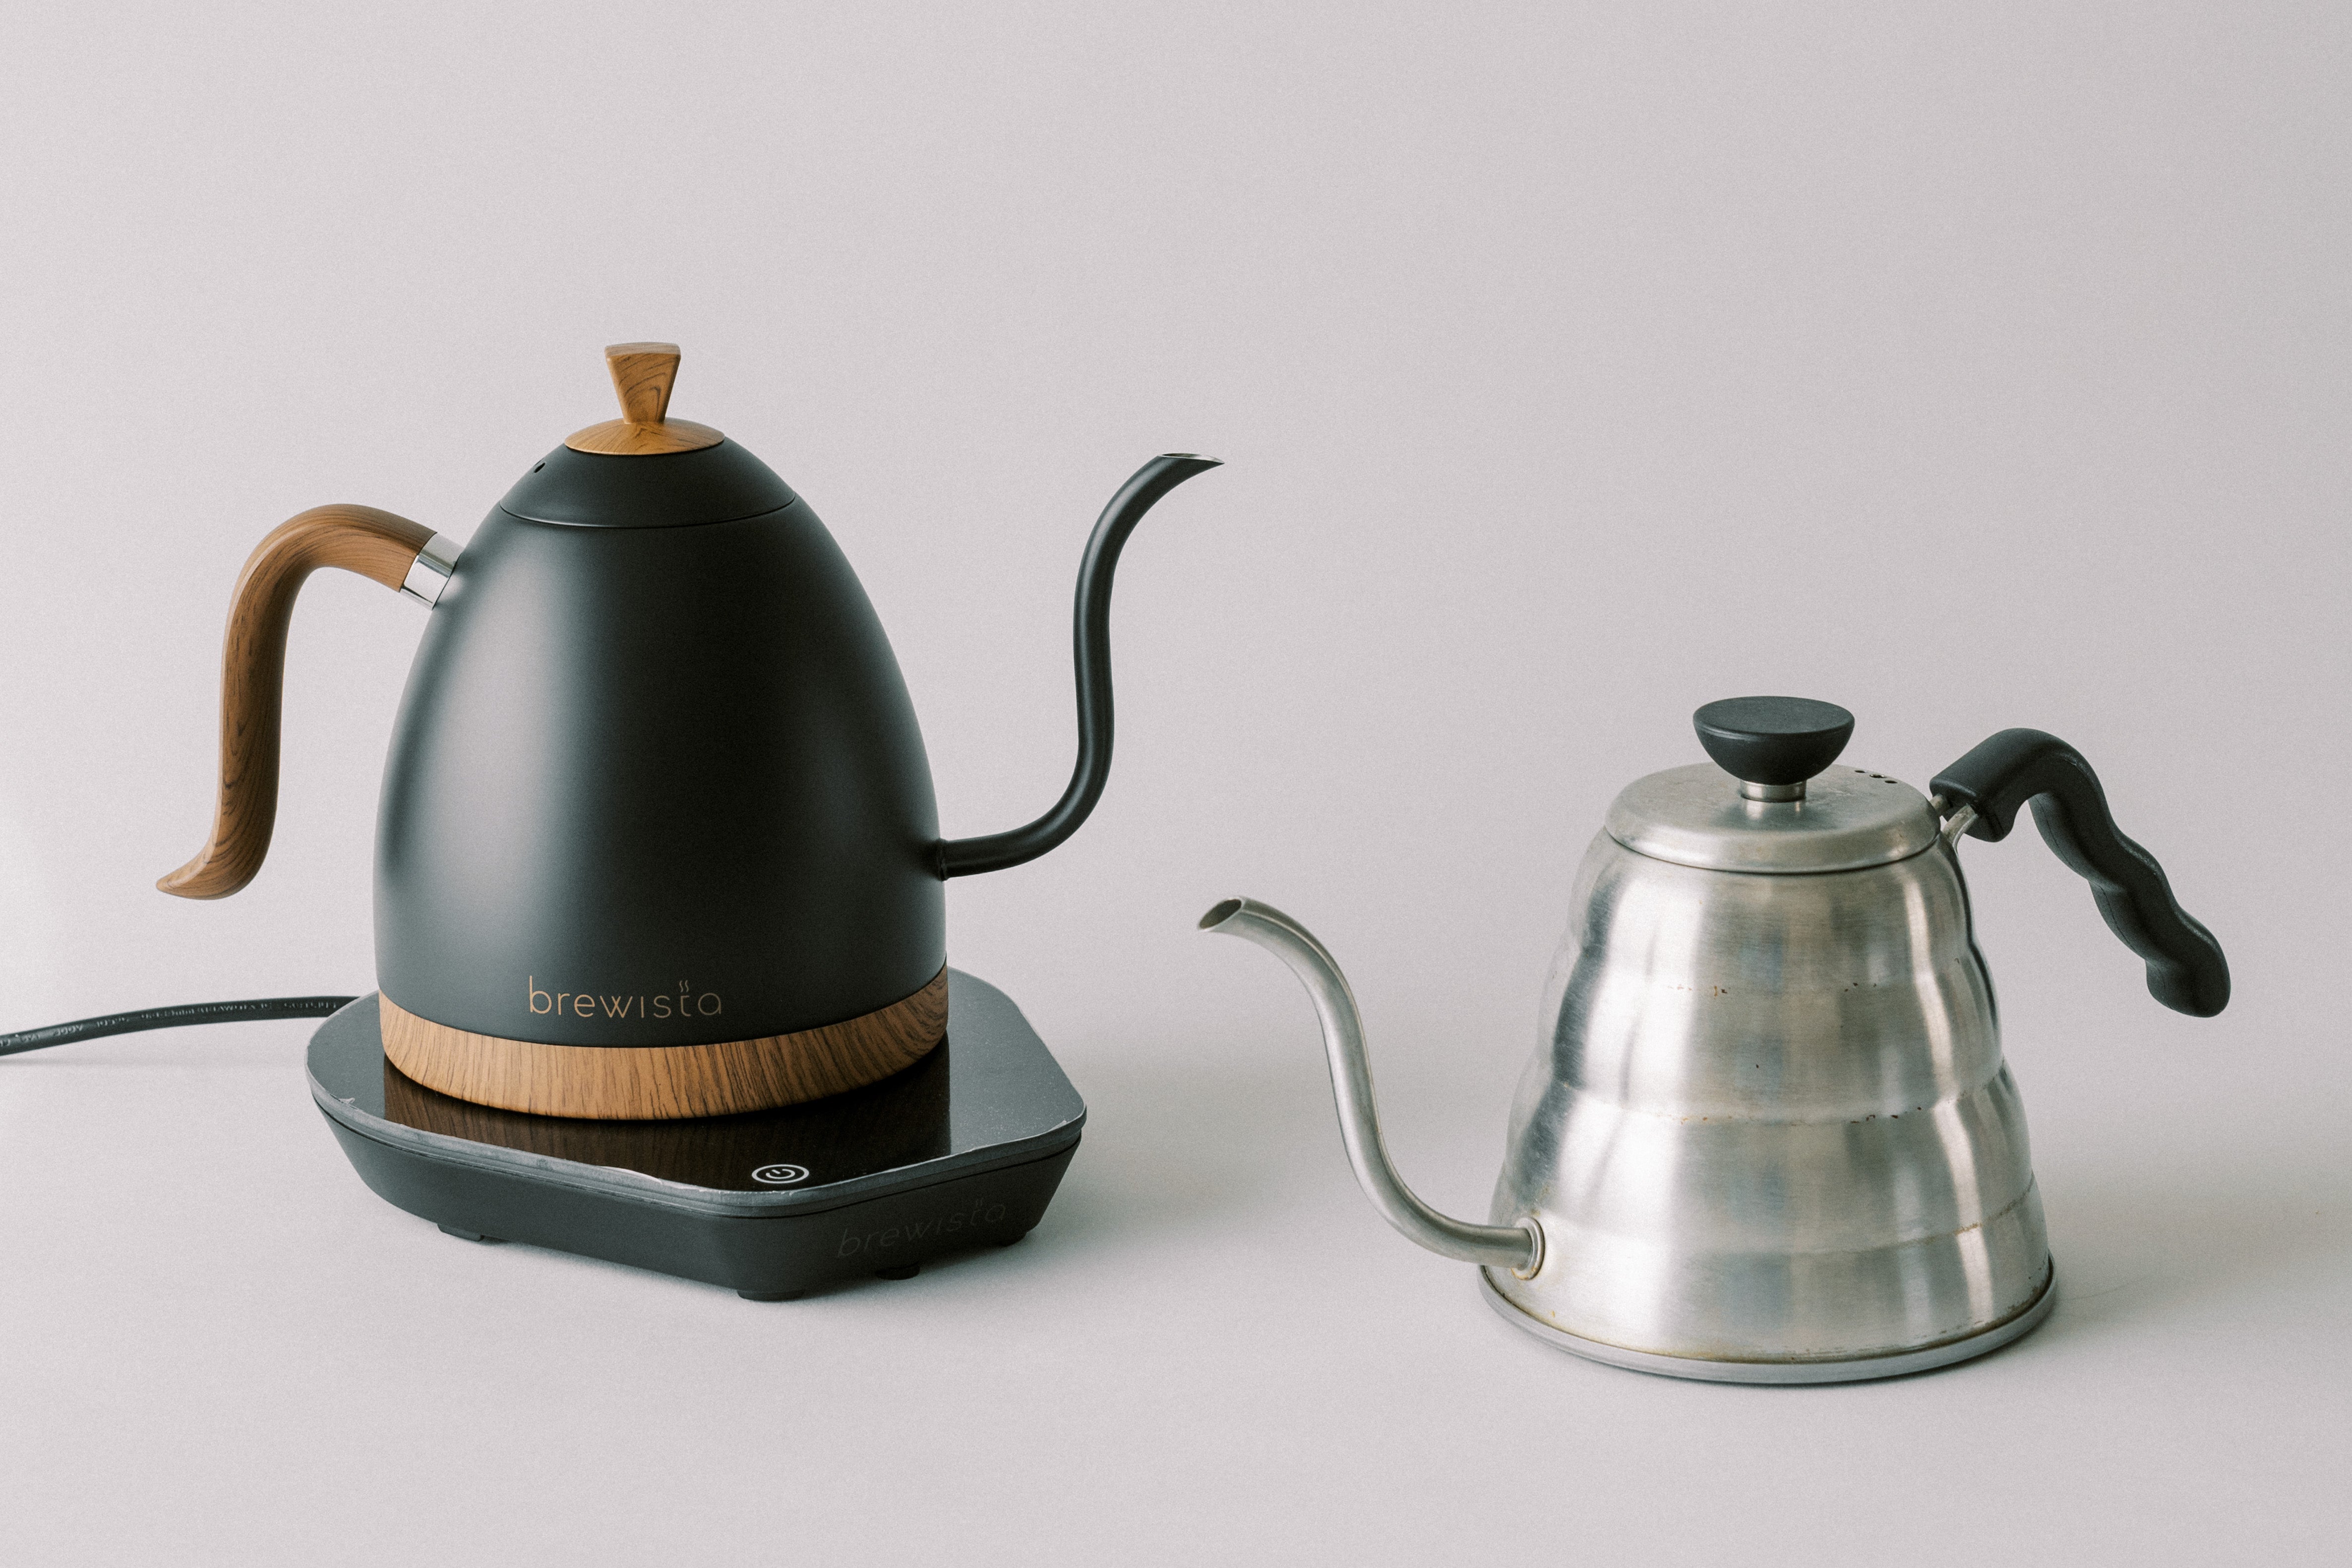 Gooseneck Electric Kettle with Temperature Control & Macao